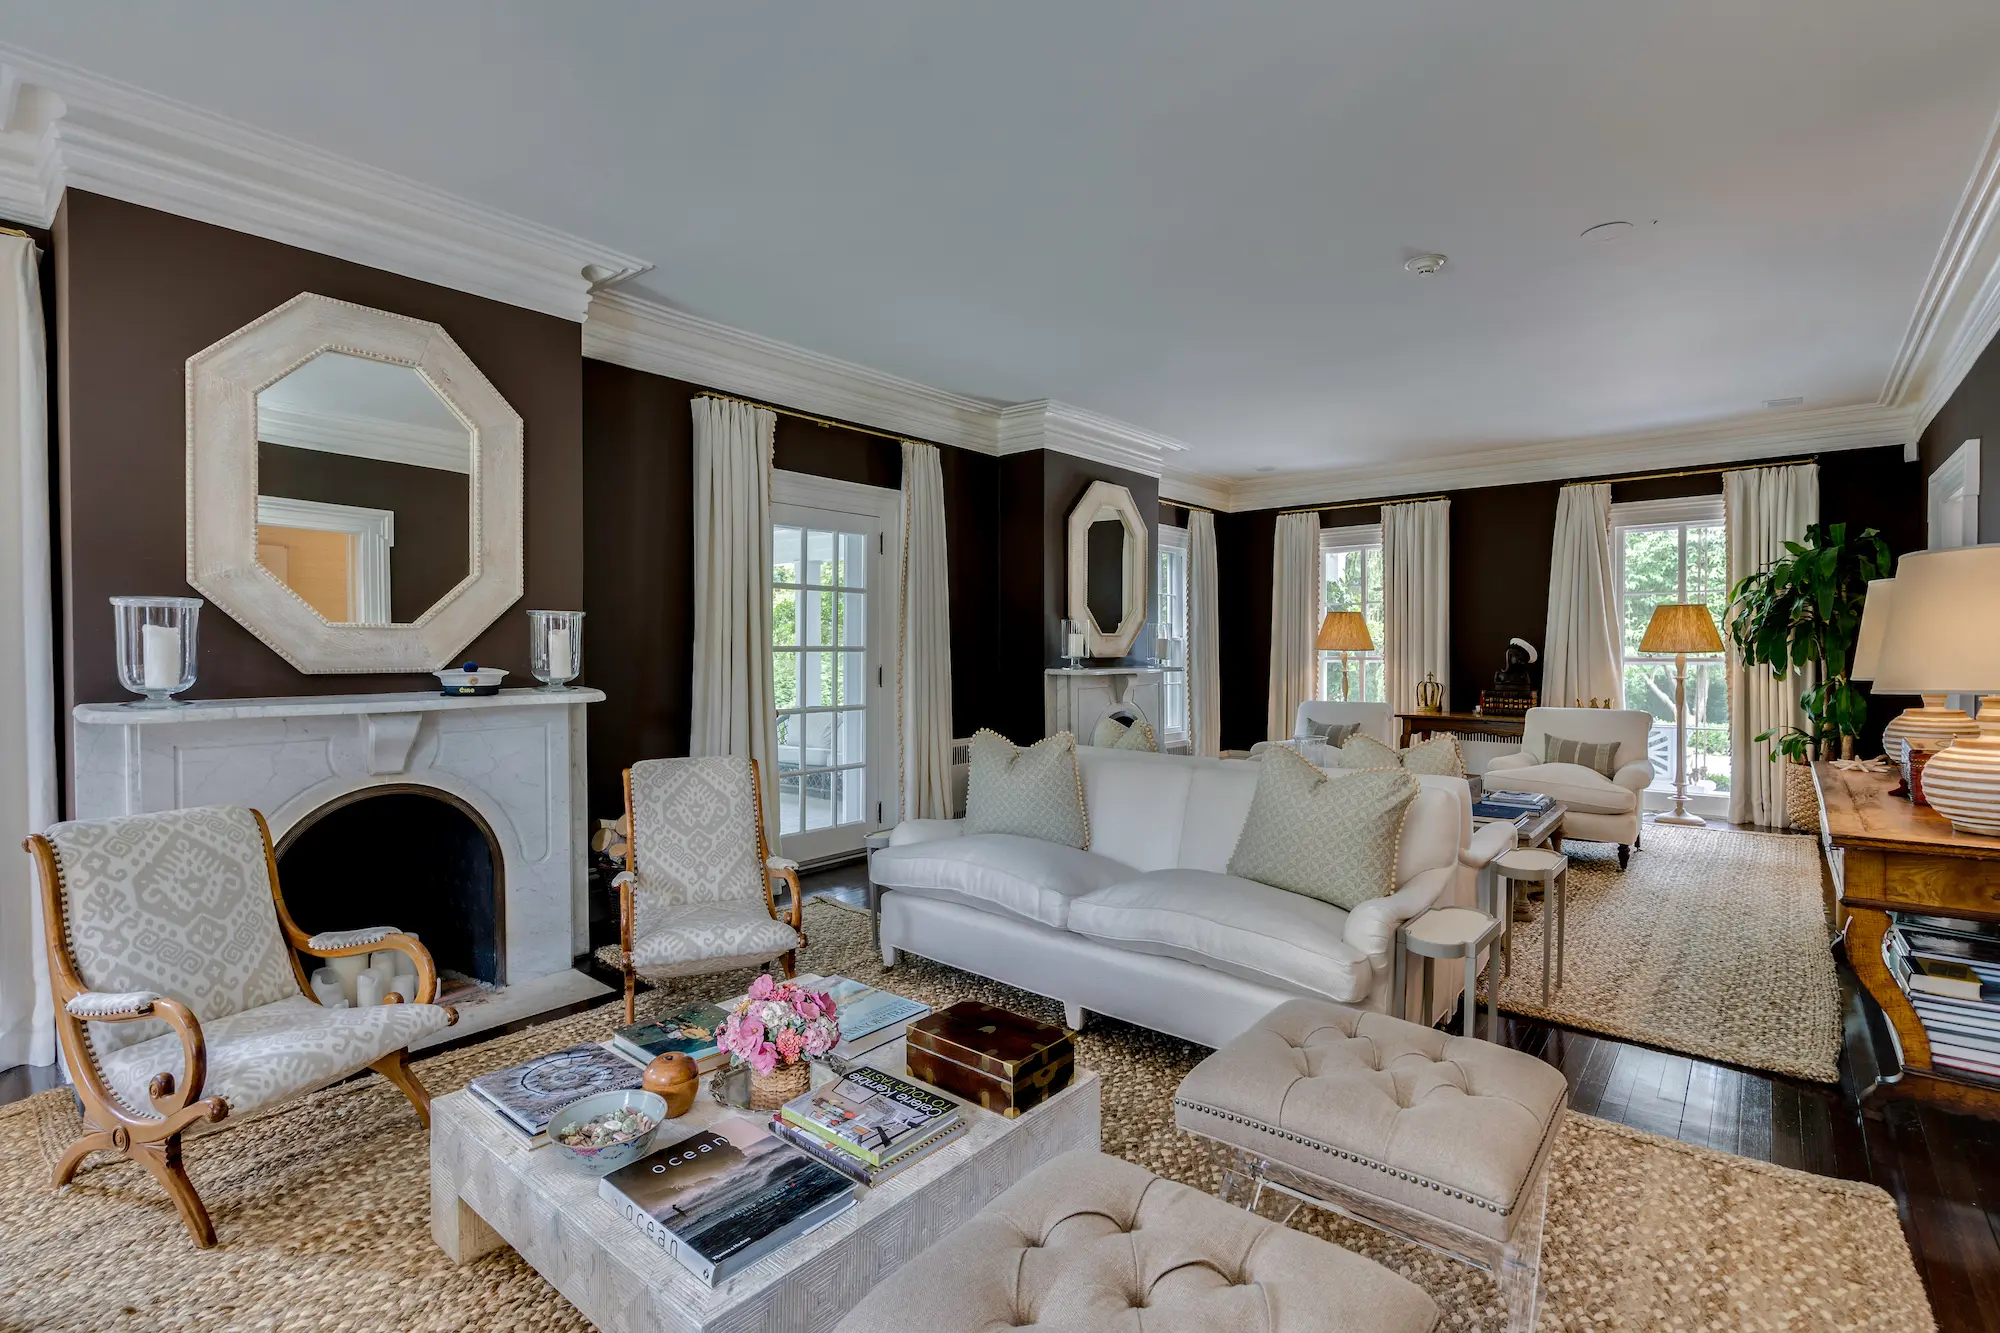 For $4.5M, a renovated 19th-century colonial with a guest cottage on ...